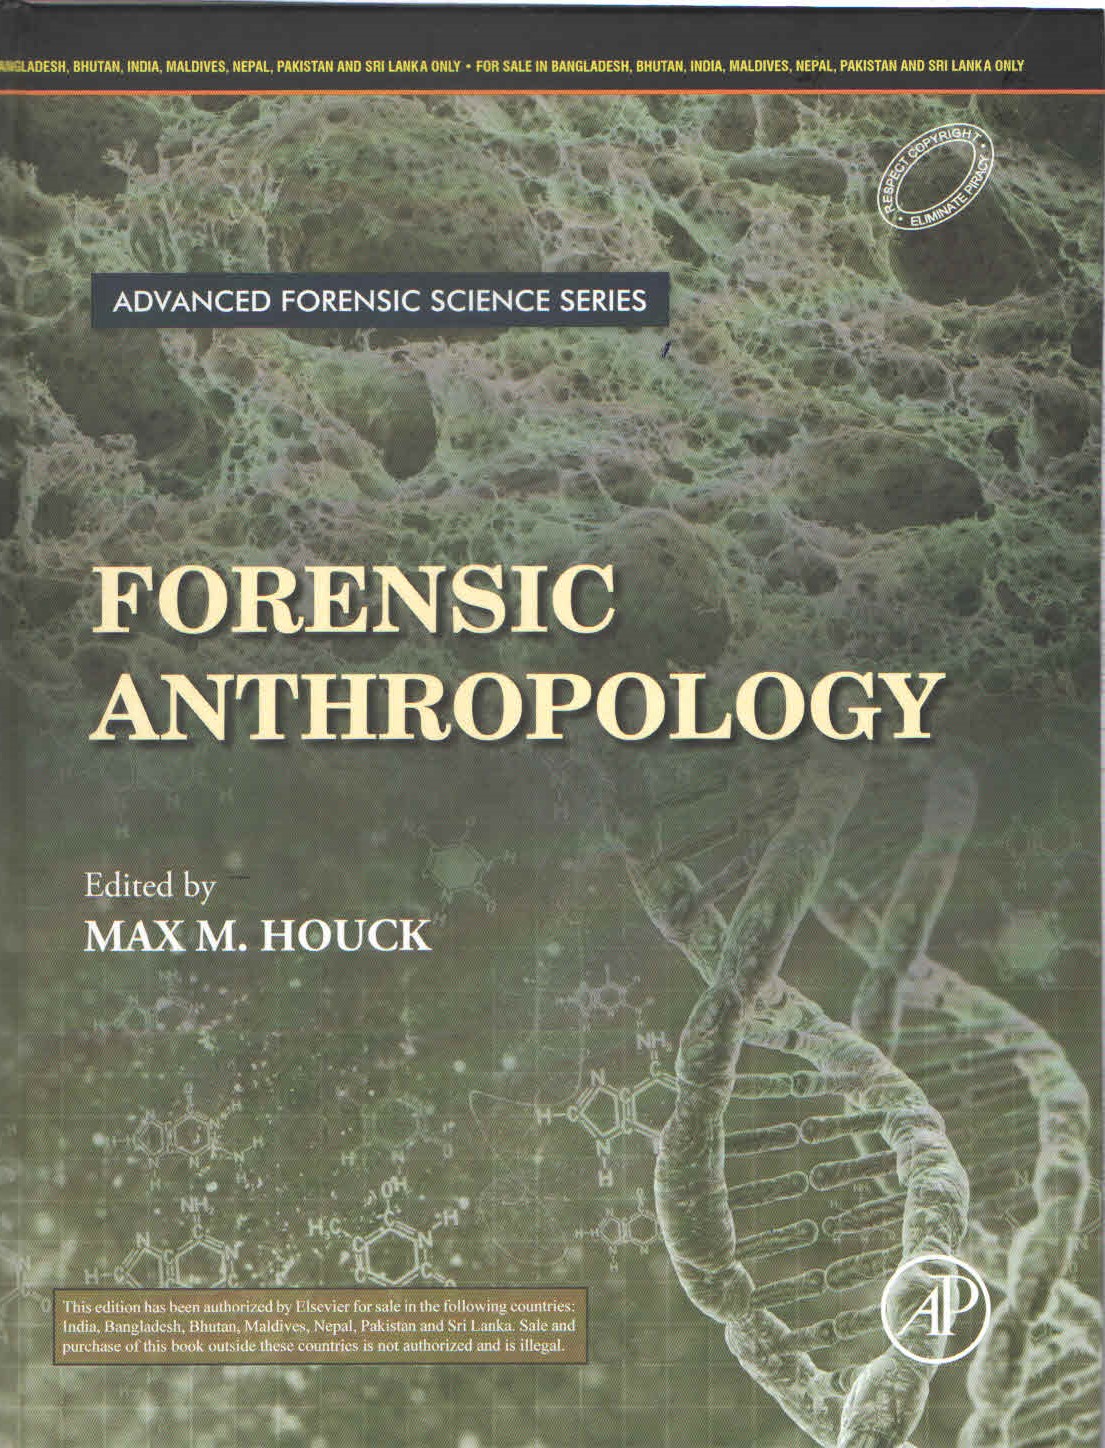 

exclusive-publishers/elsevier/forensic-anthropology-9788131269633